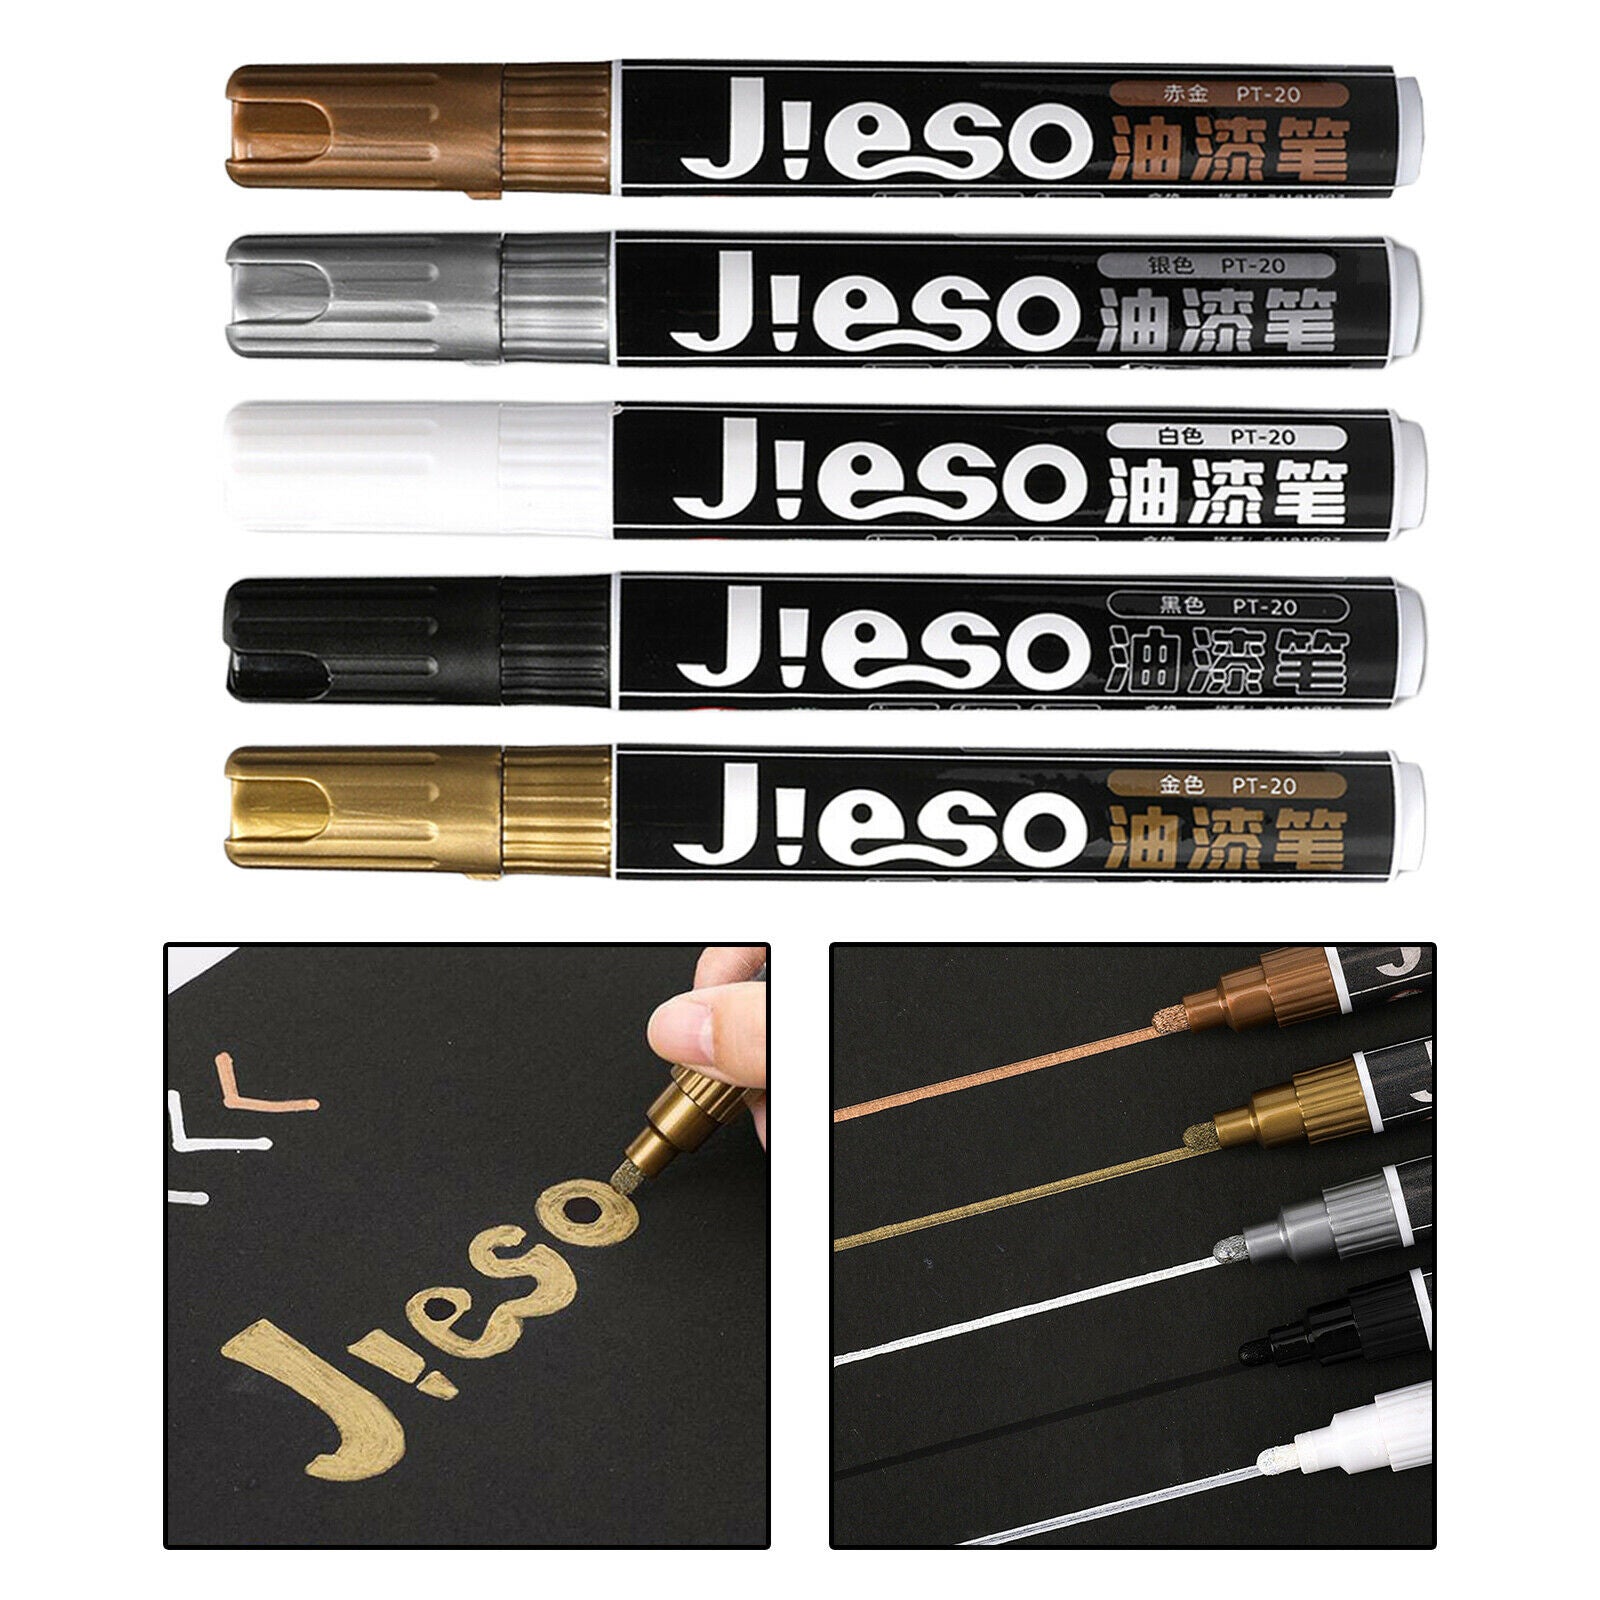 5x Metallic Marker Pens Oil Based Paint for DIY Ceramic Painting Art Crafts